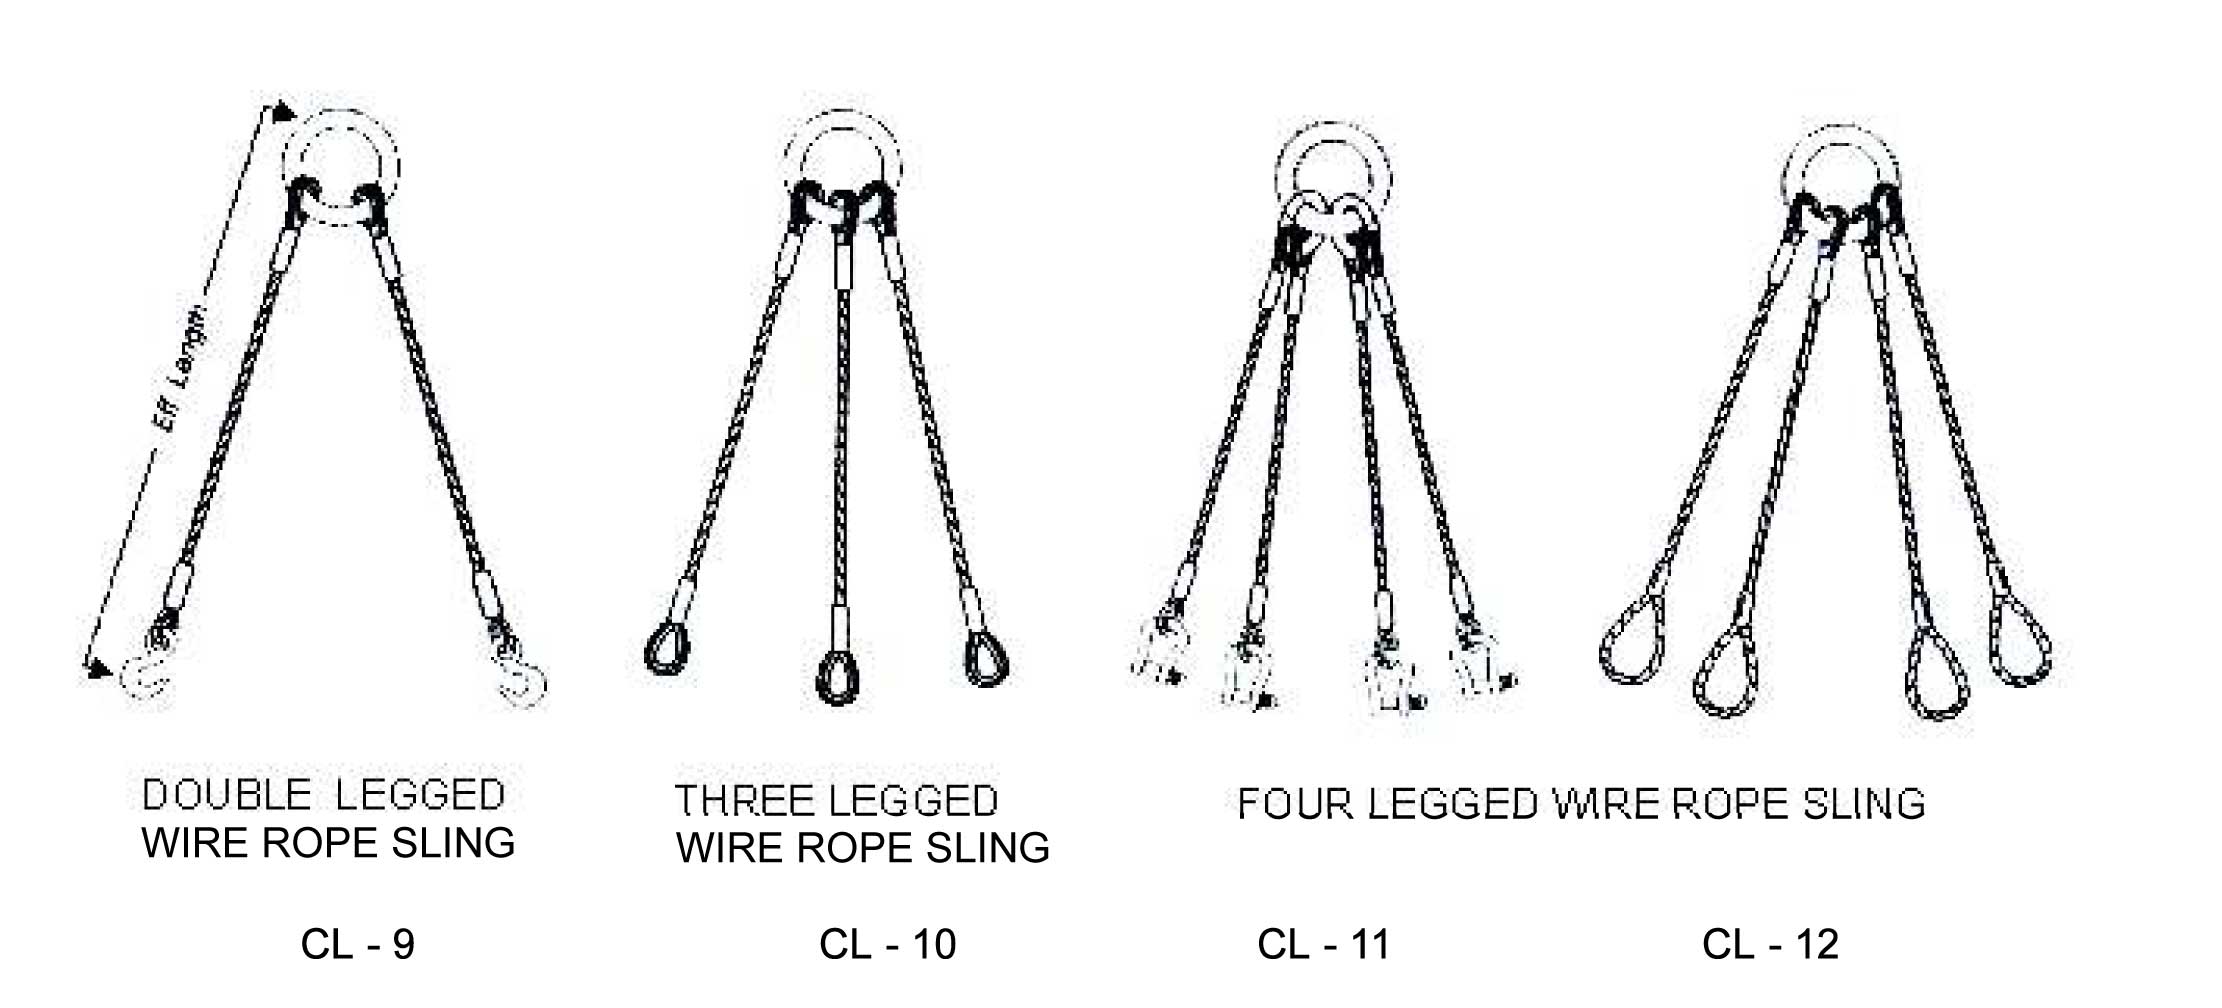 WIRE ROPE - MULTI WIRE ROPE SLING